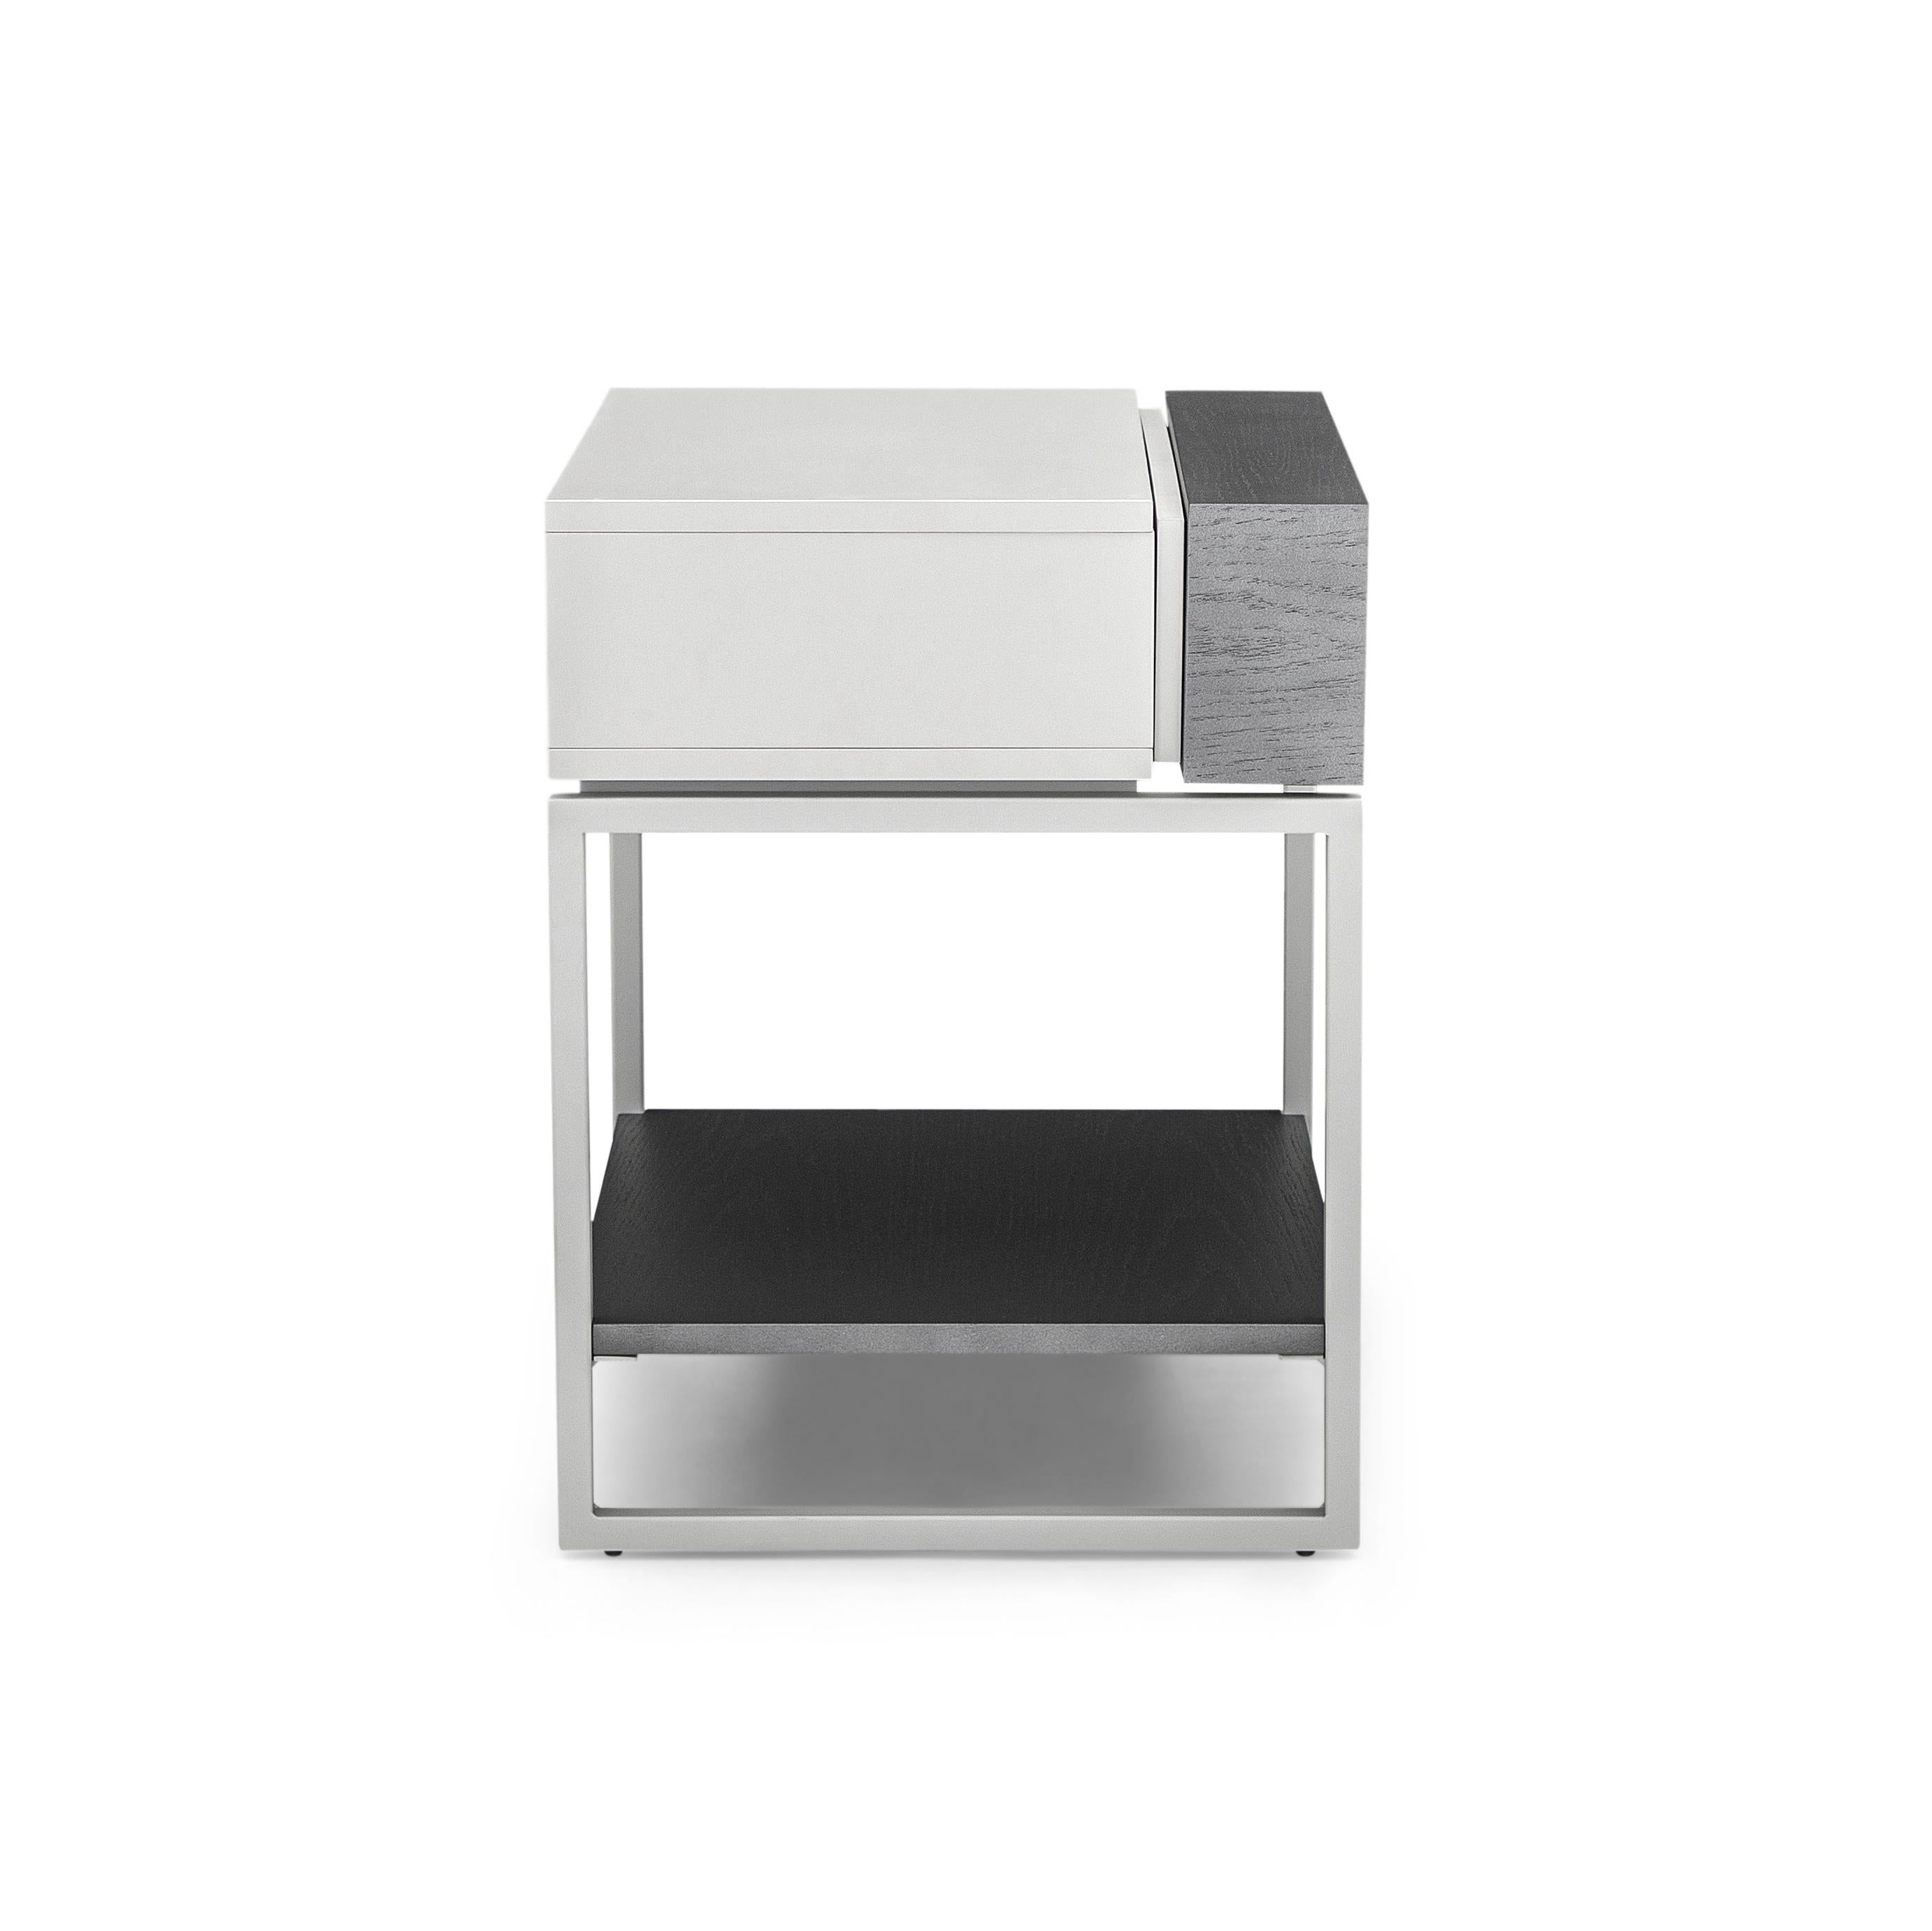 With a contemporary design, the Tallo nightstand with a gray oak drawer and off-white frame valorizes minimalist features that add extreme sophistication to the product. Perfect for a modern contemporary/minimalist bedroom decor. The metal base for